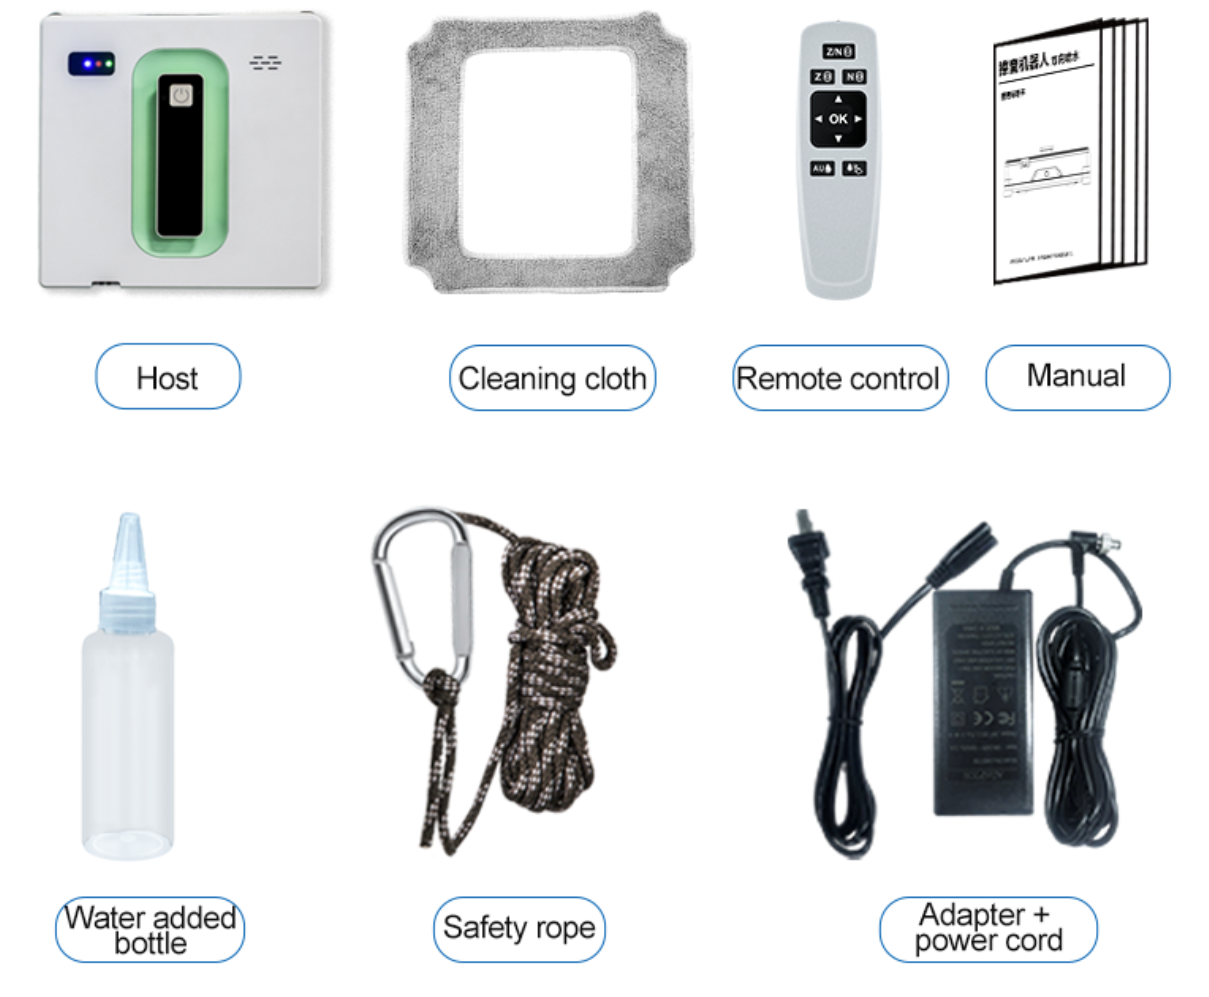 Product accessories